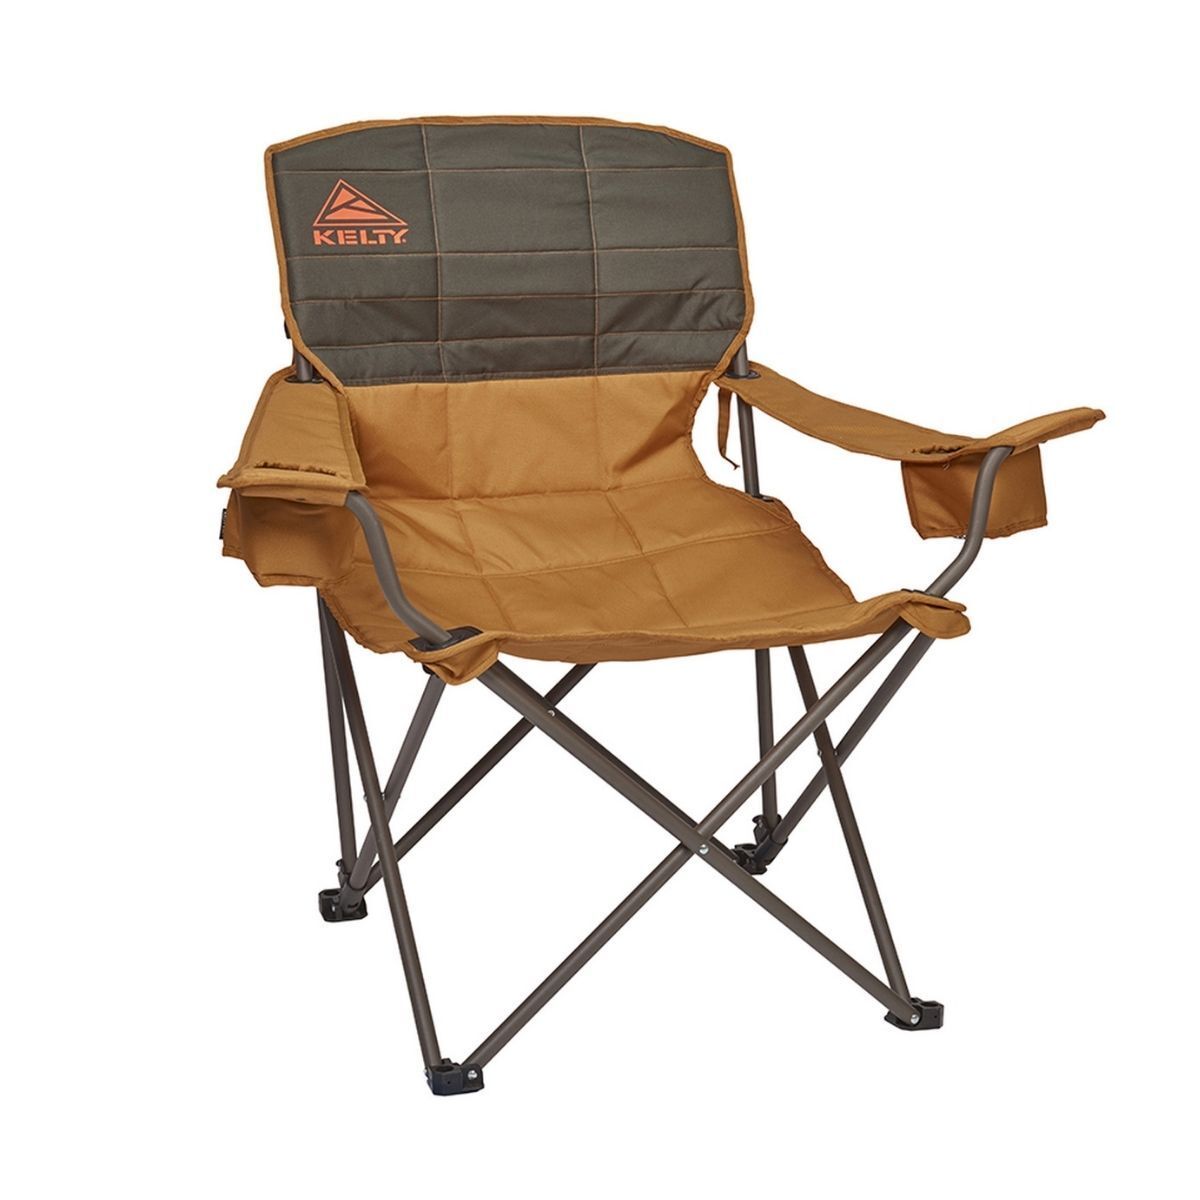 Kelty Deluxe Lounge Chair - Silla de camping